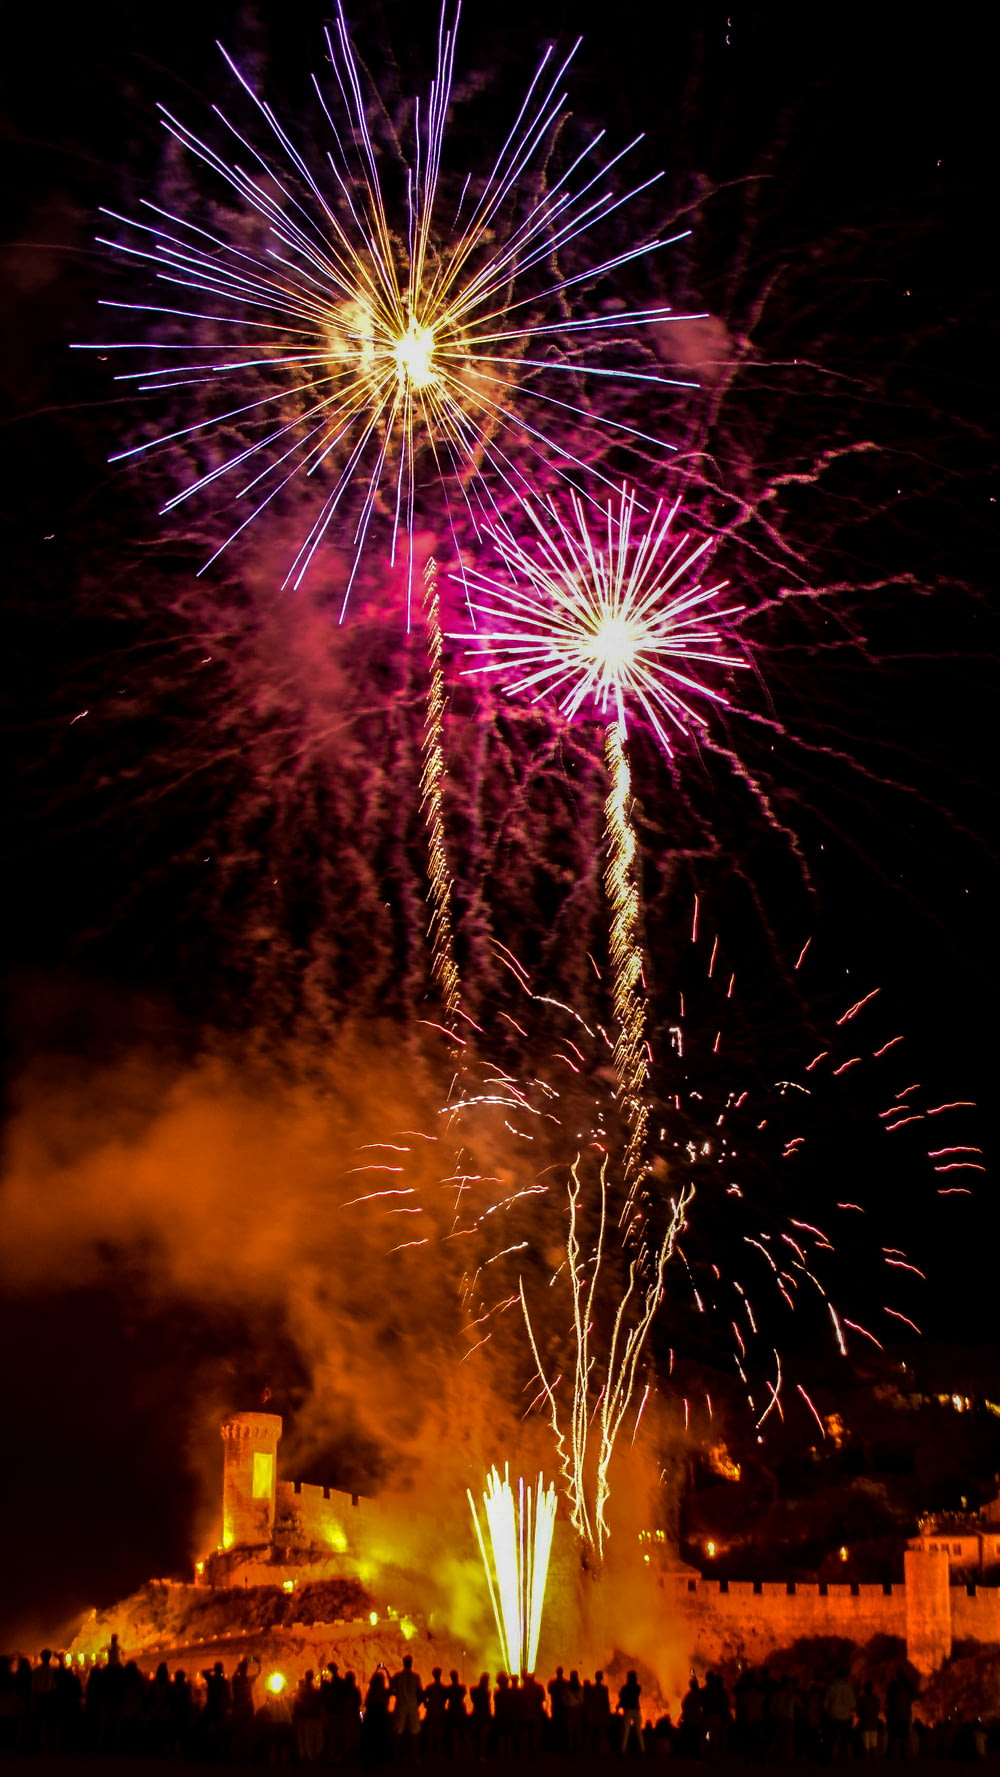 a large fireworks display with a castle in the background